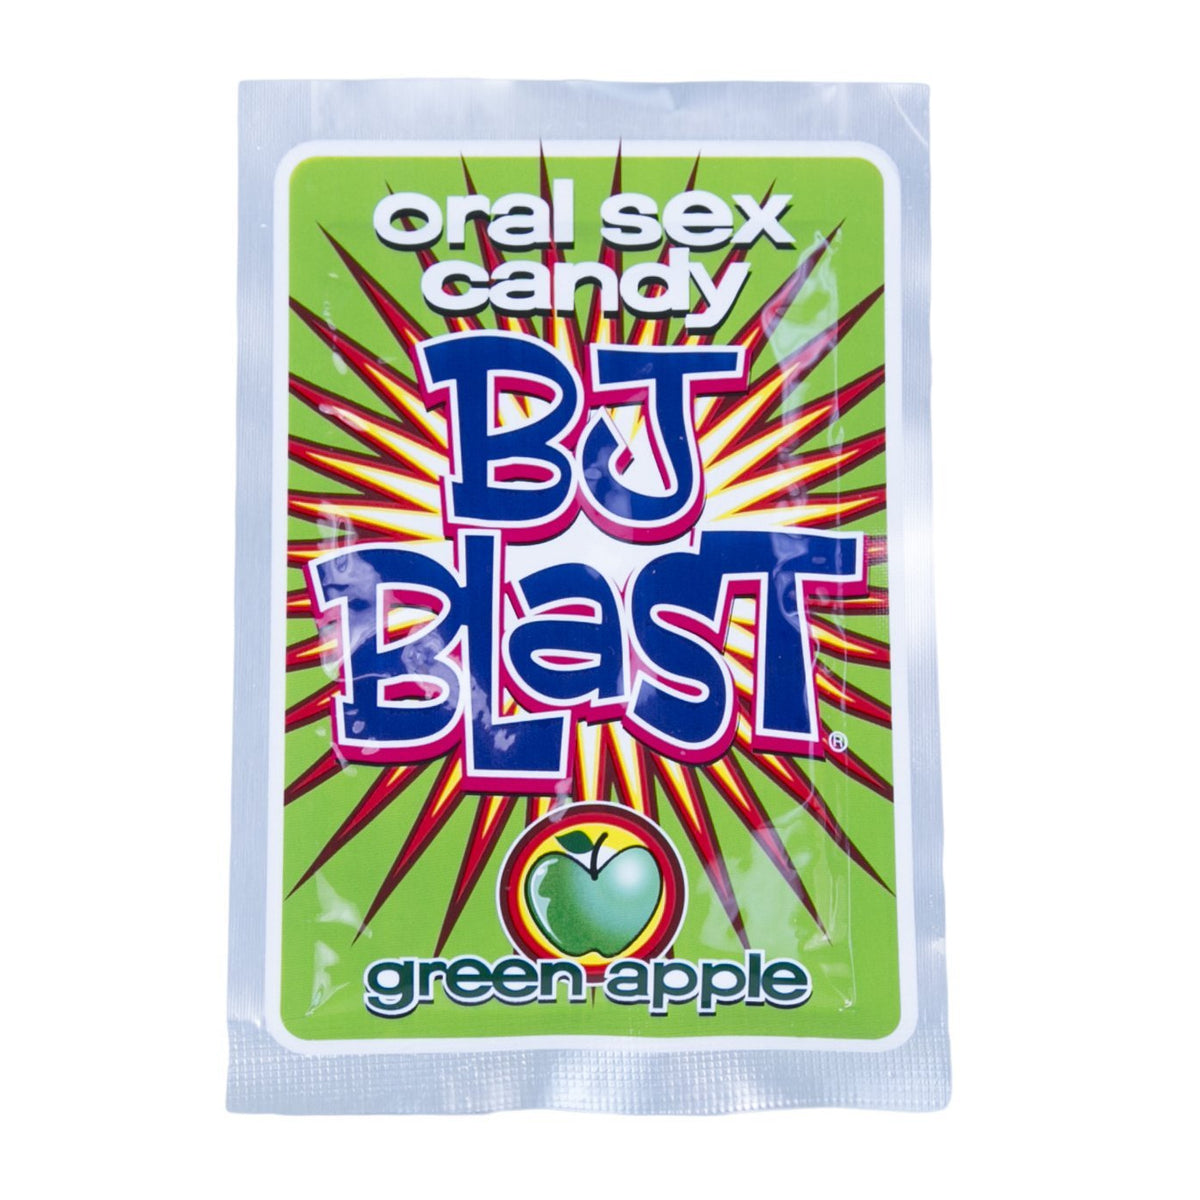 Pipedream Products Bj Blast Oral Sex Candy Display Bms Enterprises 5542